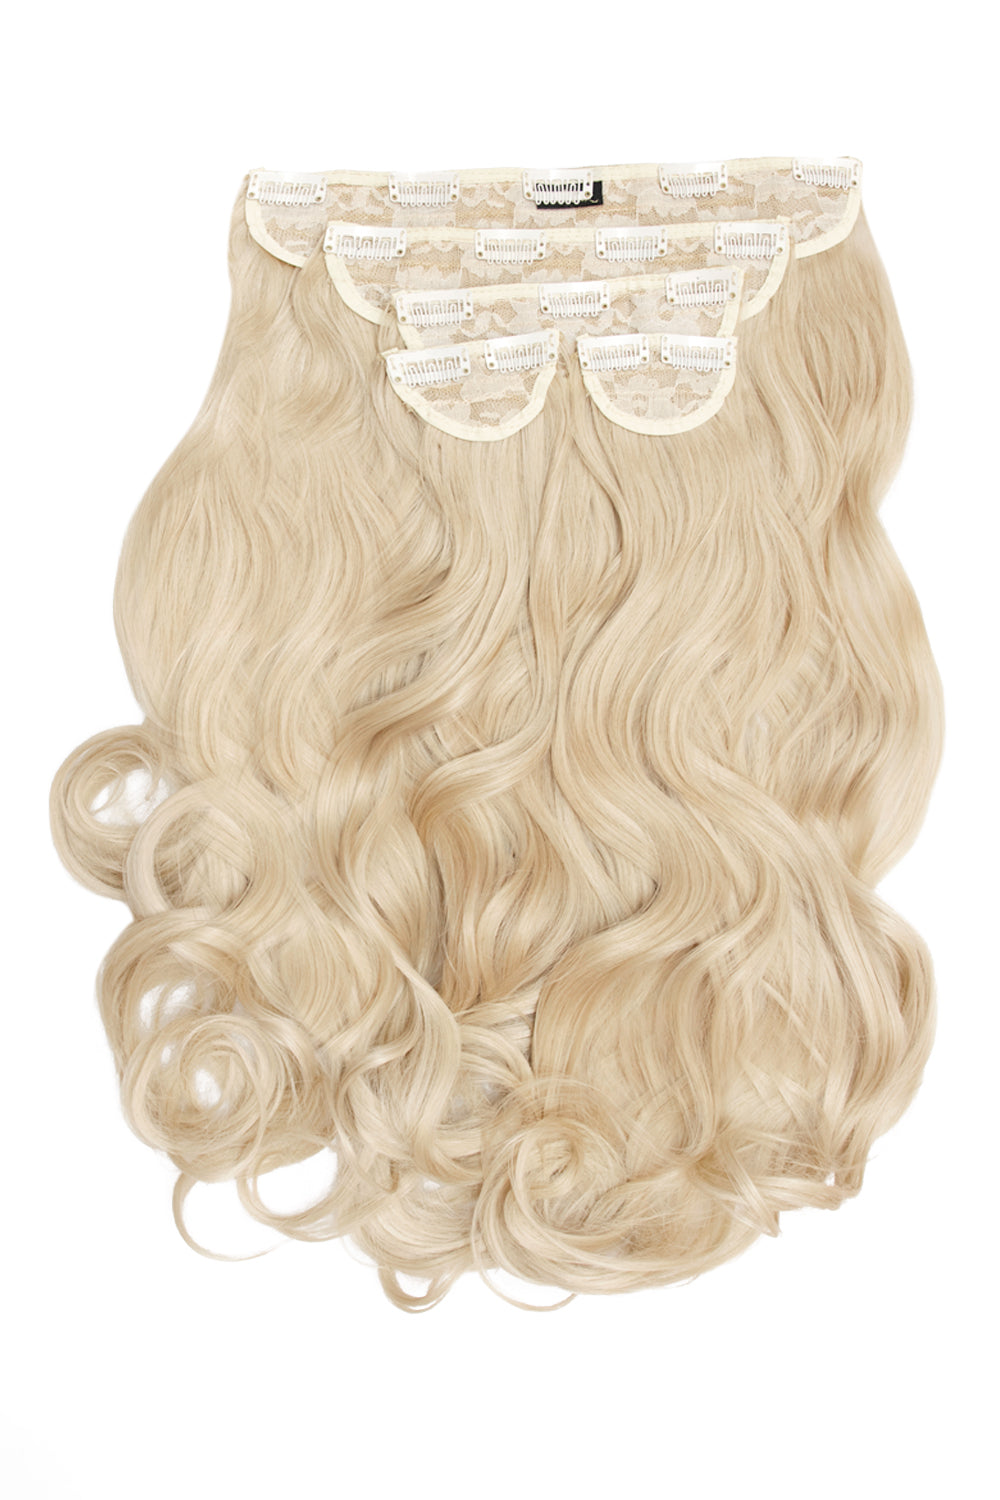 Super Thick 22" 5 Piece Curly Clip In Hair Extensions - Light Blonde